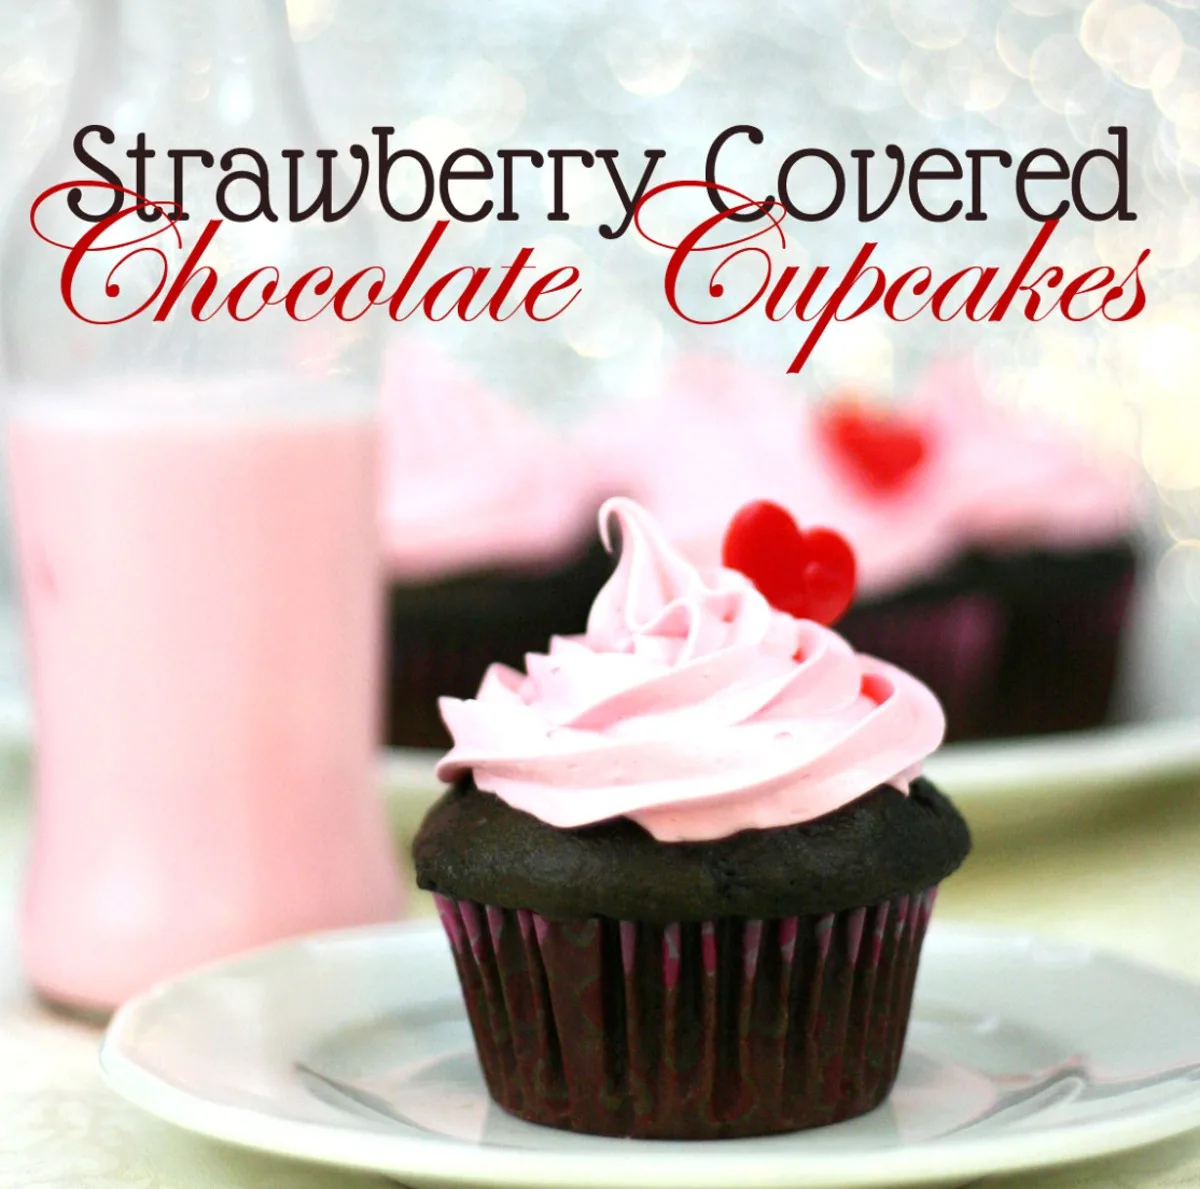 Strawberry Covered Chocolate Cupcakes